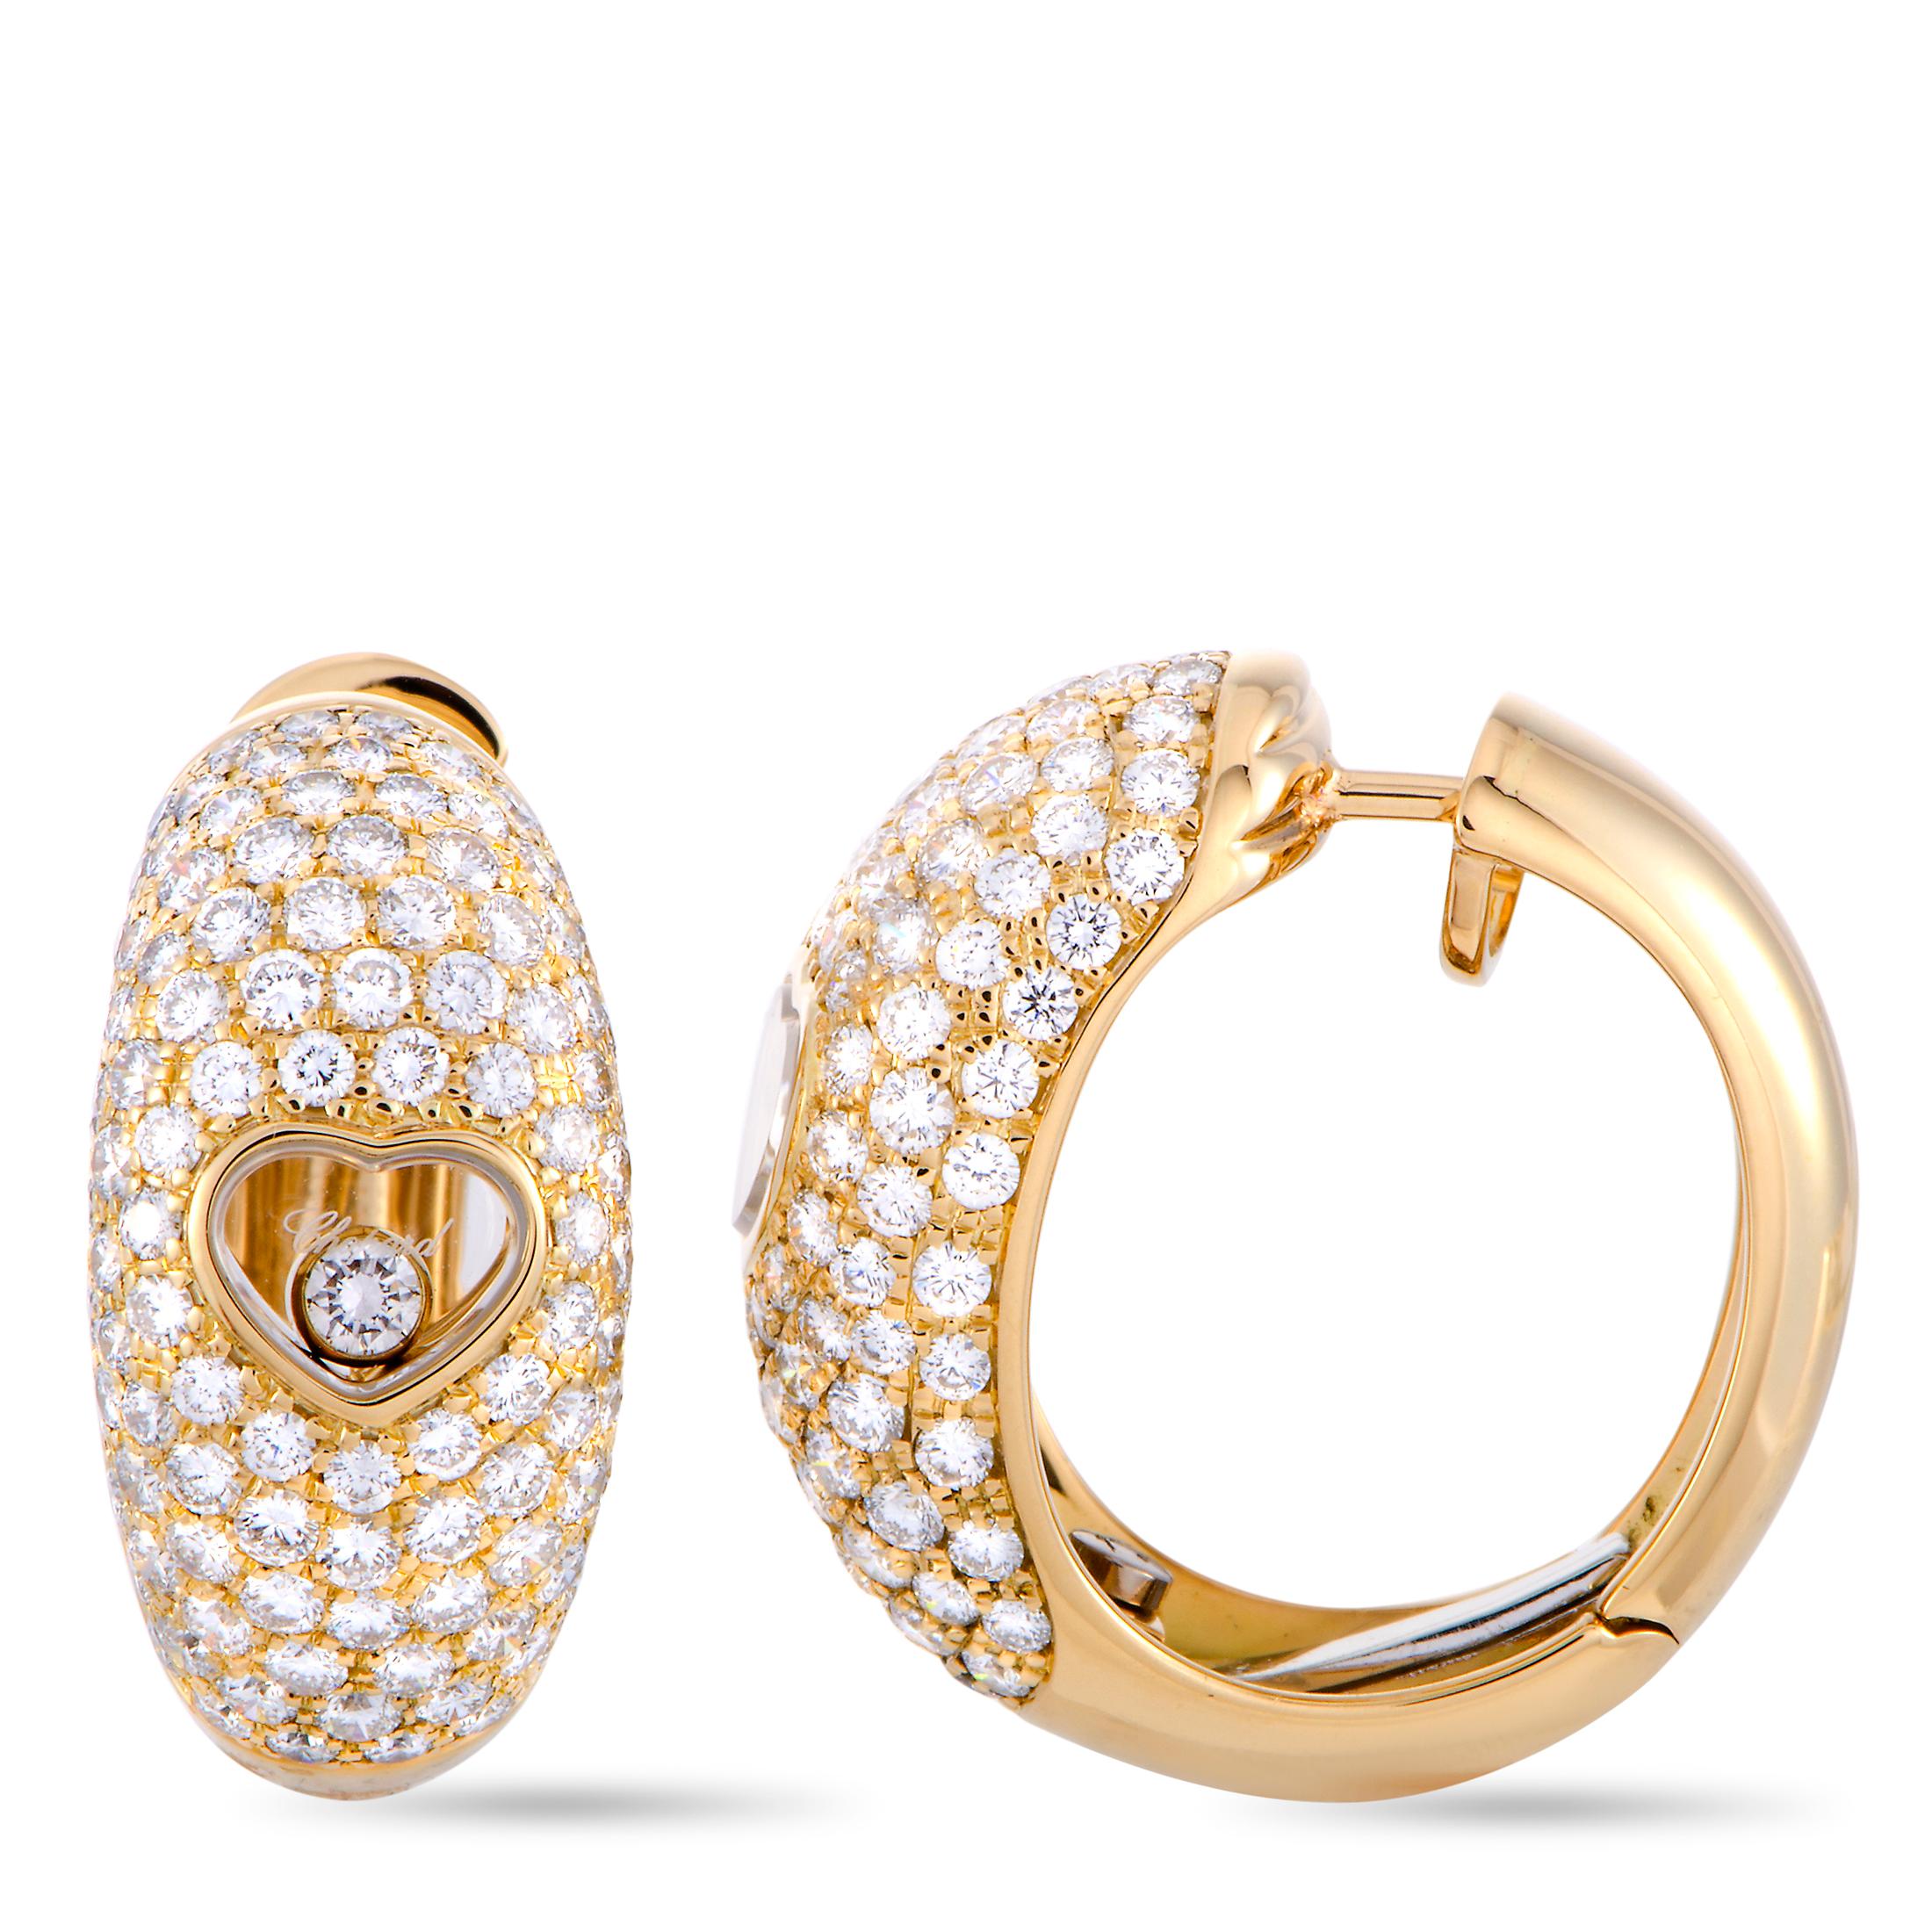 The Chopard “Happy Diamonds” earrings are crafted from 18K yellow gold and set with a total of 3.23 carats of diamonds that feature F-G color and IF-VVS clarity (the two floating stones total 0.11 carats and the remaining stones amount to 3.12